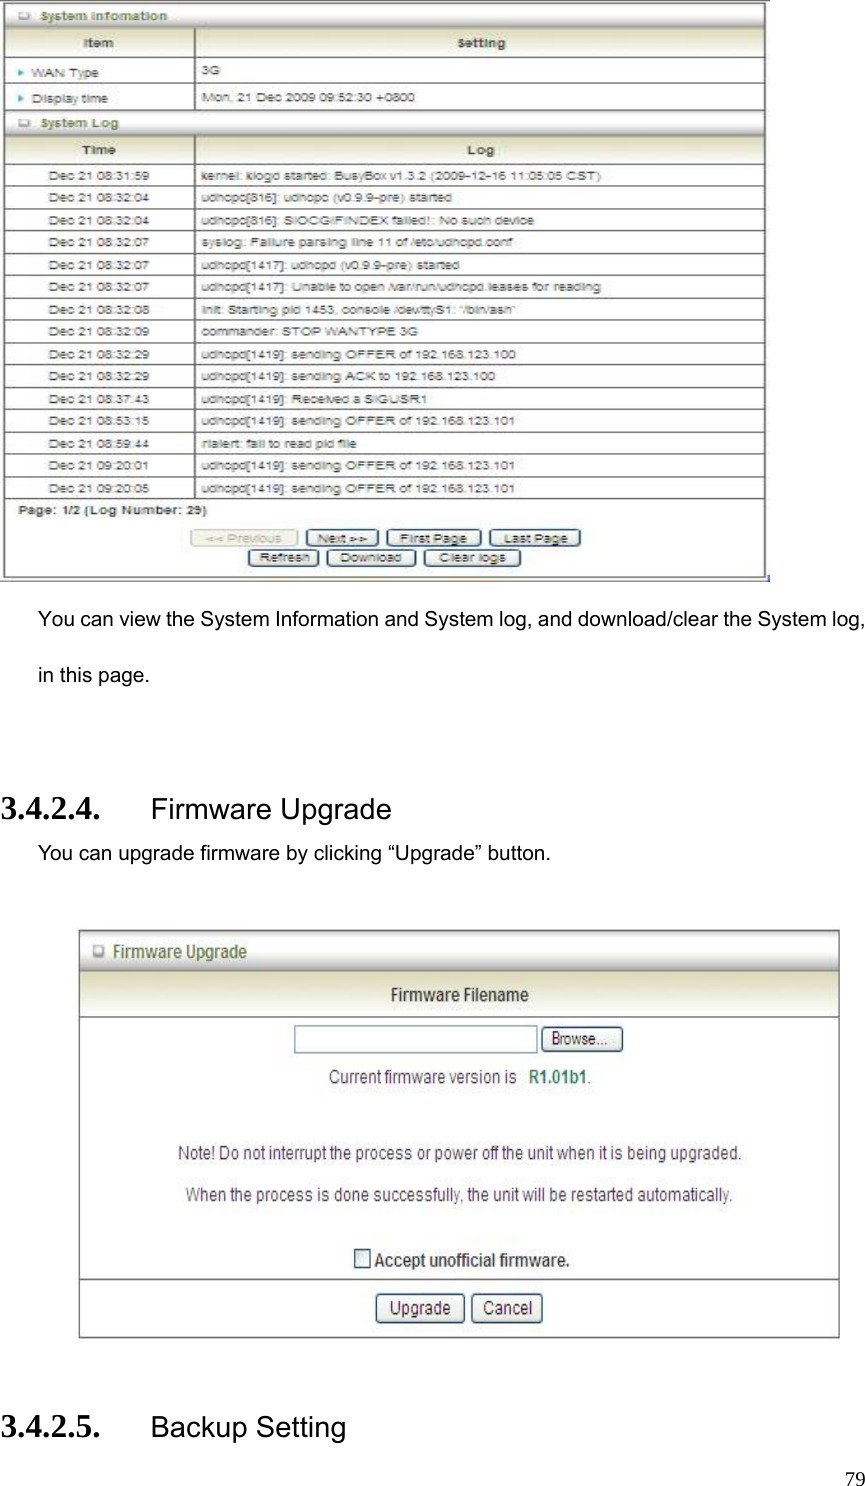  79 You can view the System Information and System log, and download/clear the System log, in this page.  3.4.2.4. Firmware Upgrade You can upgrade firmware by clicking “Upgrade” button.      3.4.2.5. Backup Setting 